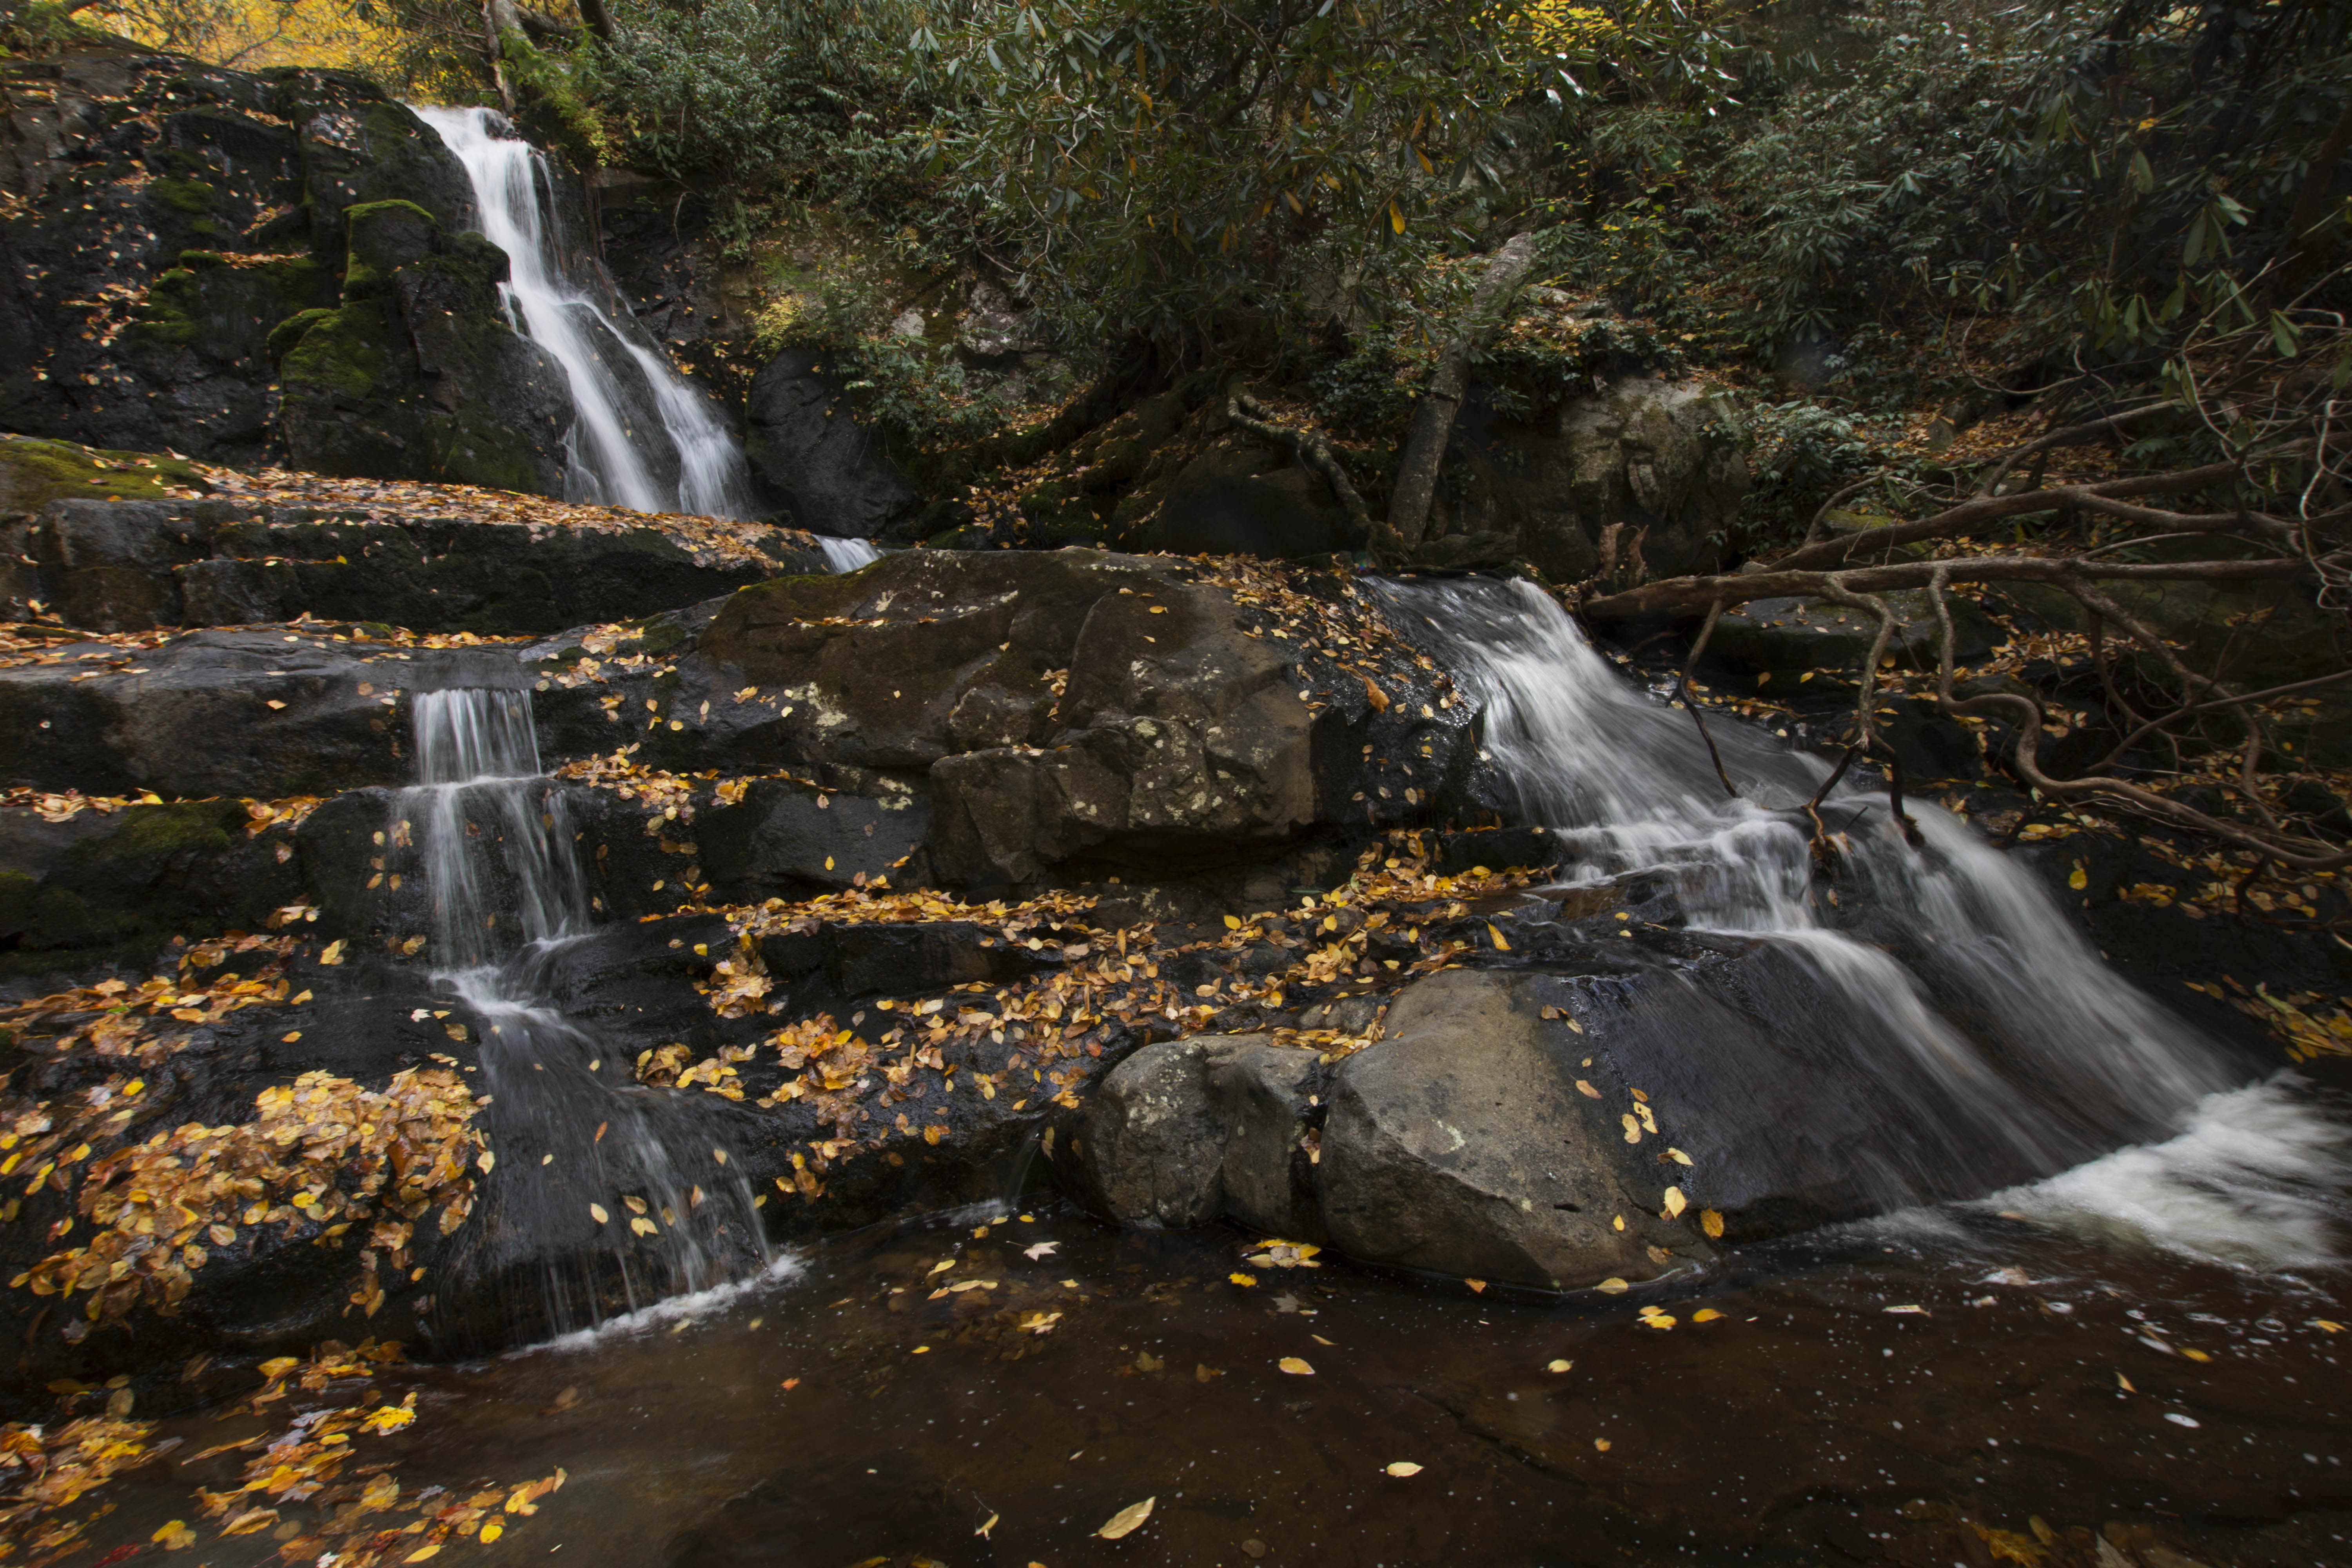 Laurel Falls -- a waterfall rushing over rocks, with fallen yellow leaves in and around the water